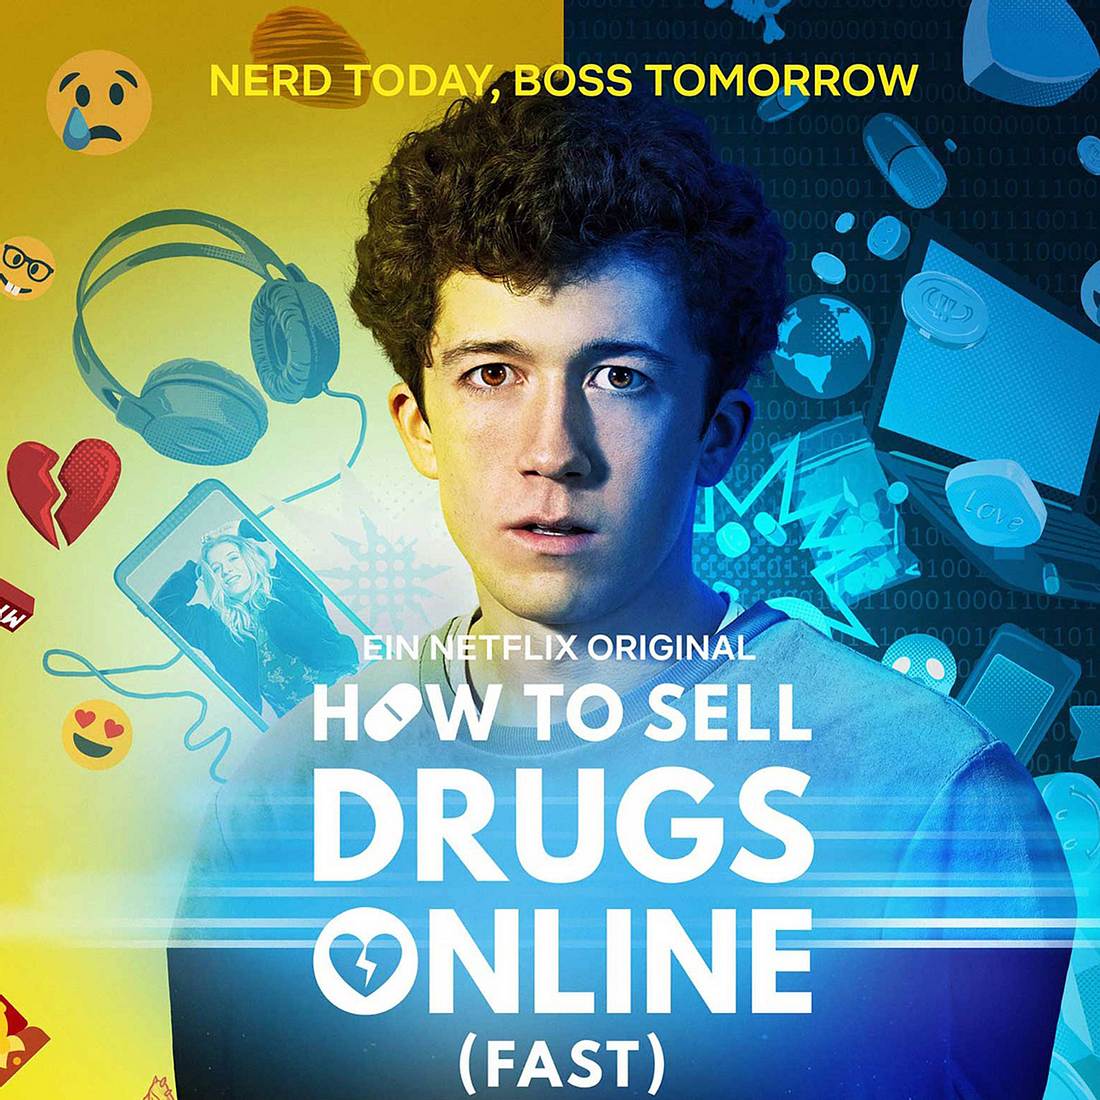 How To Sell Drugs Online (Fast): Alle Infos zur 2. Staffel!